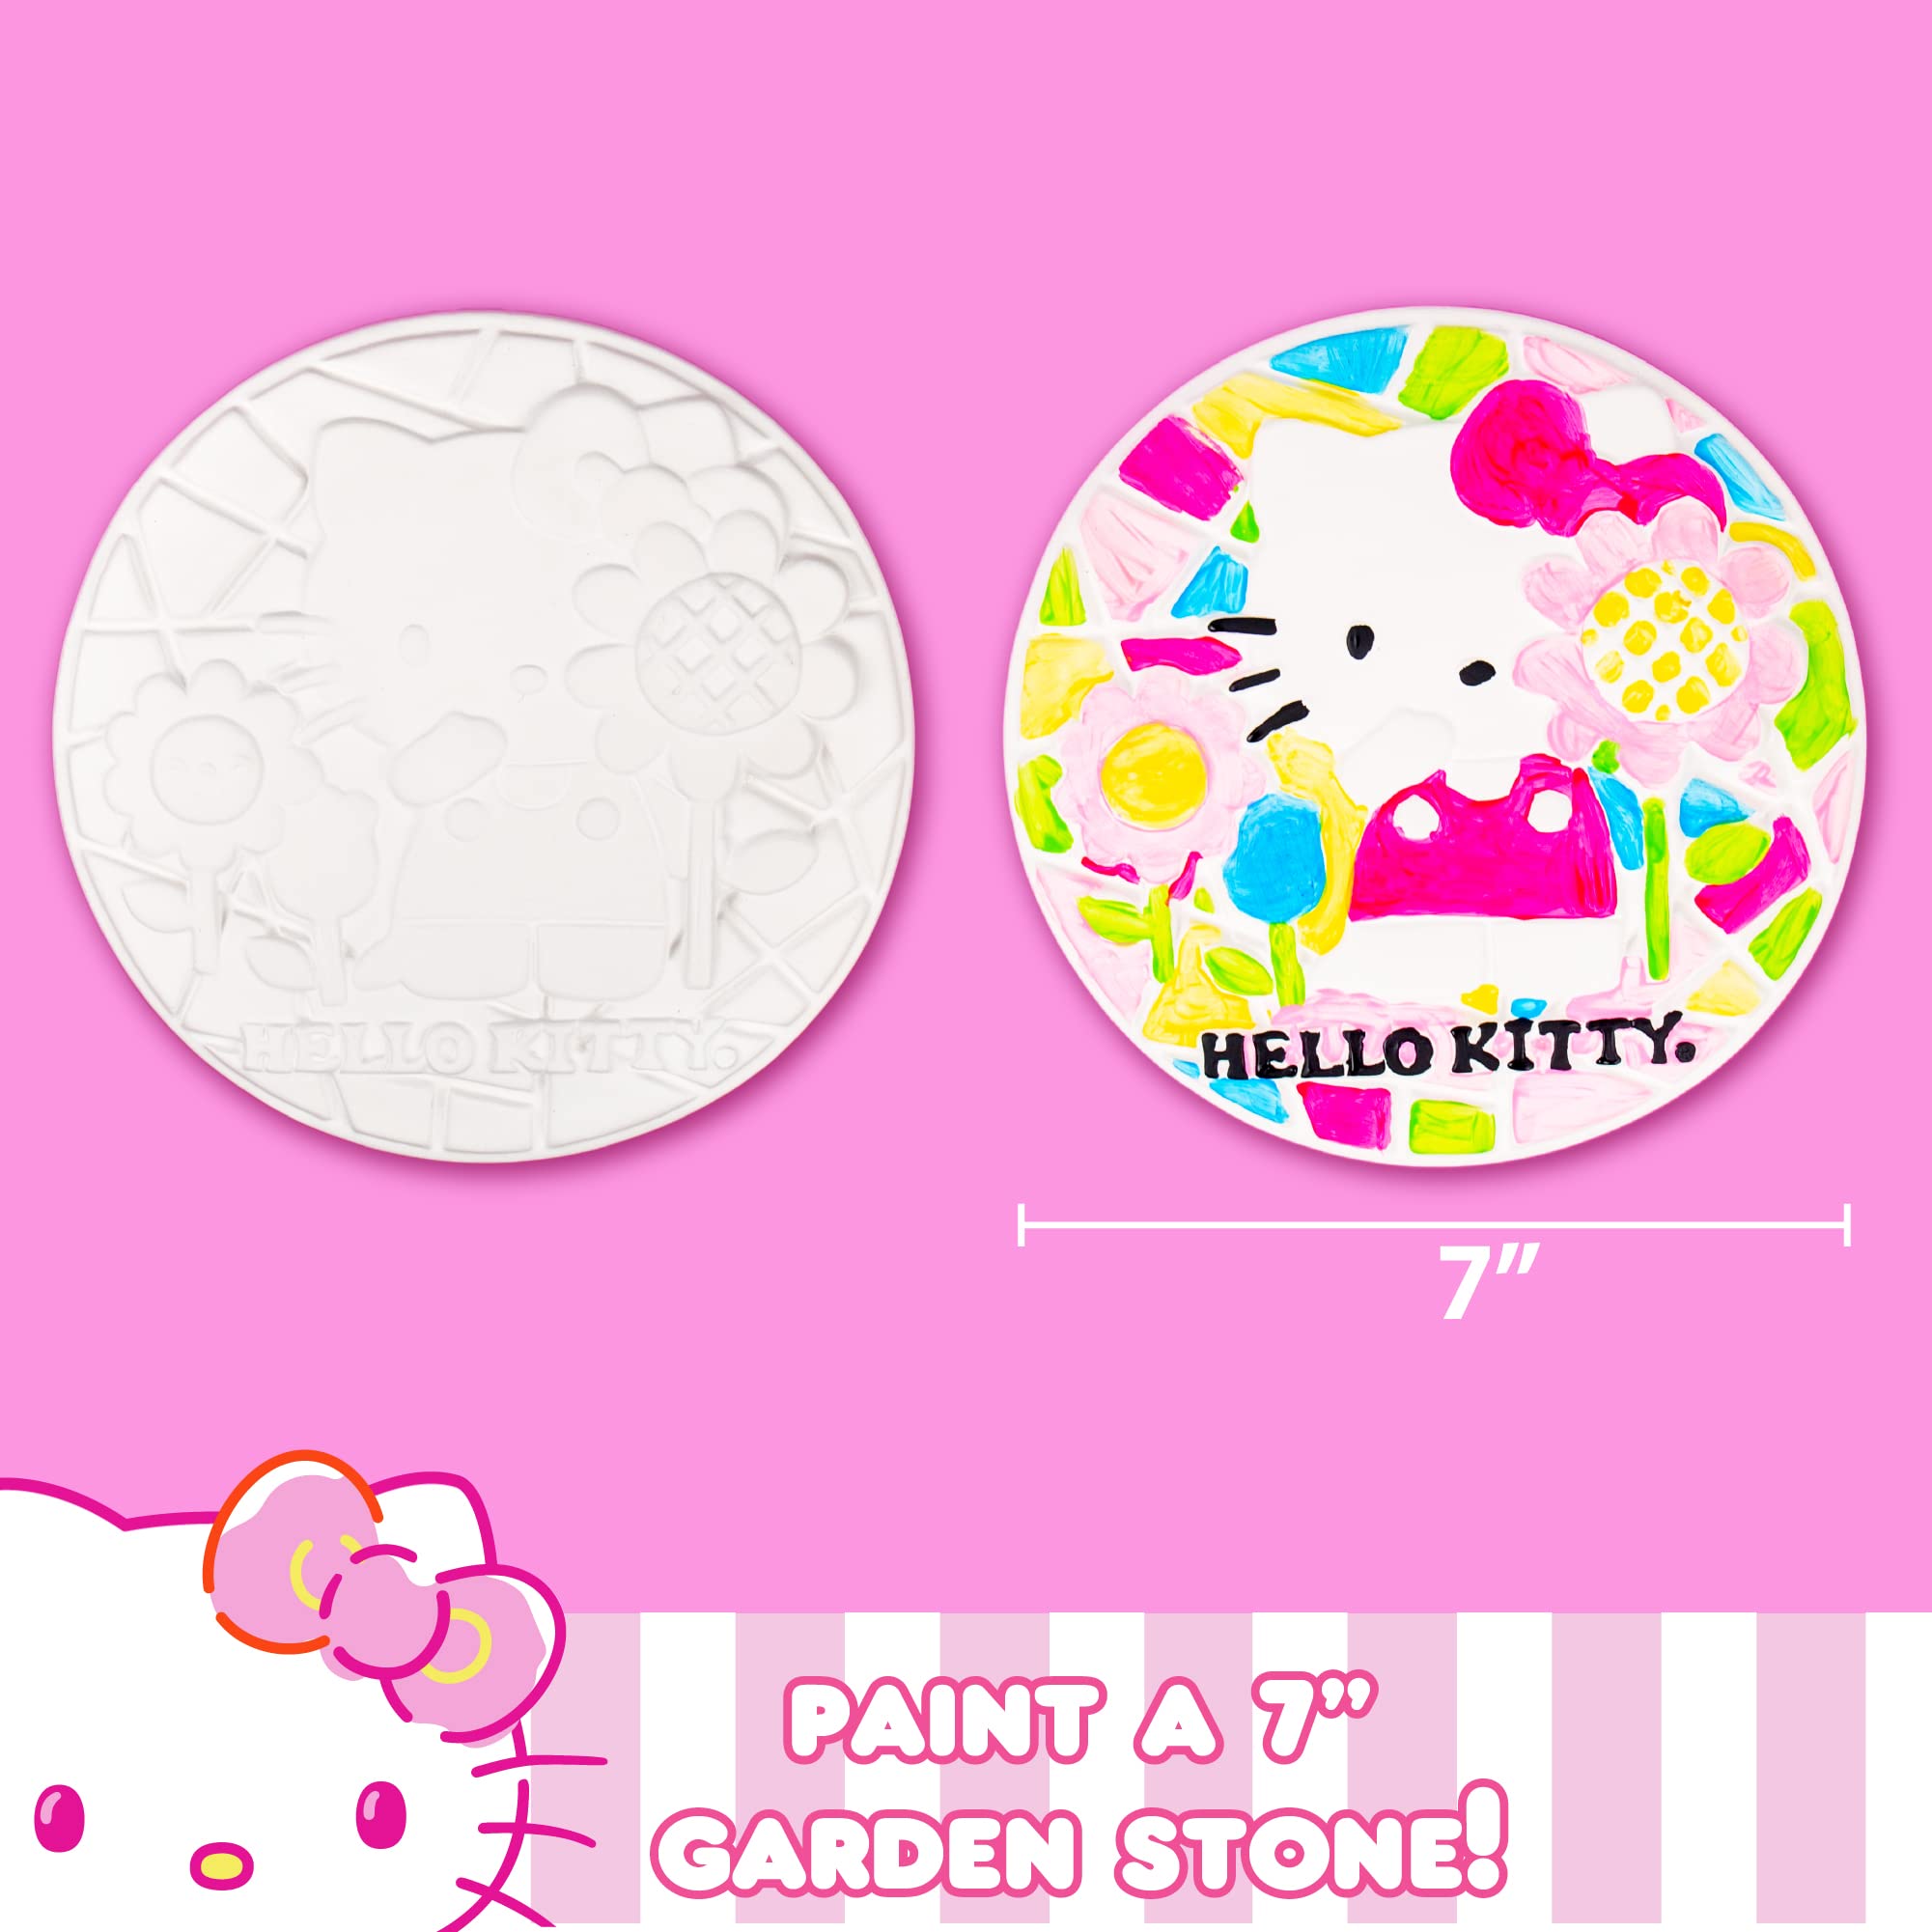 Sanrio Hello Kitty Paint Your Own Stepping Stone, Includes 7” Stepping Stone, 6 Paints & 1 Paintbrush, Cute Gifts for Kids Teens Girls Adults